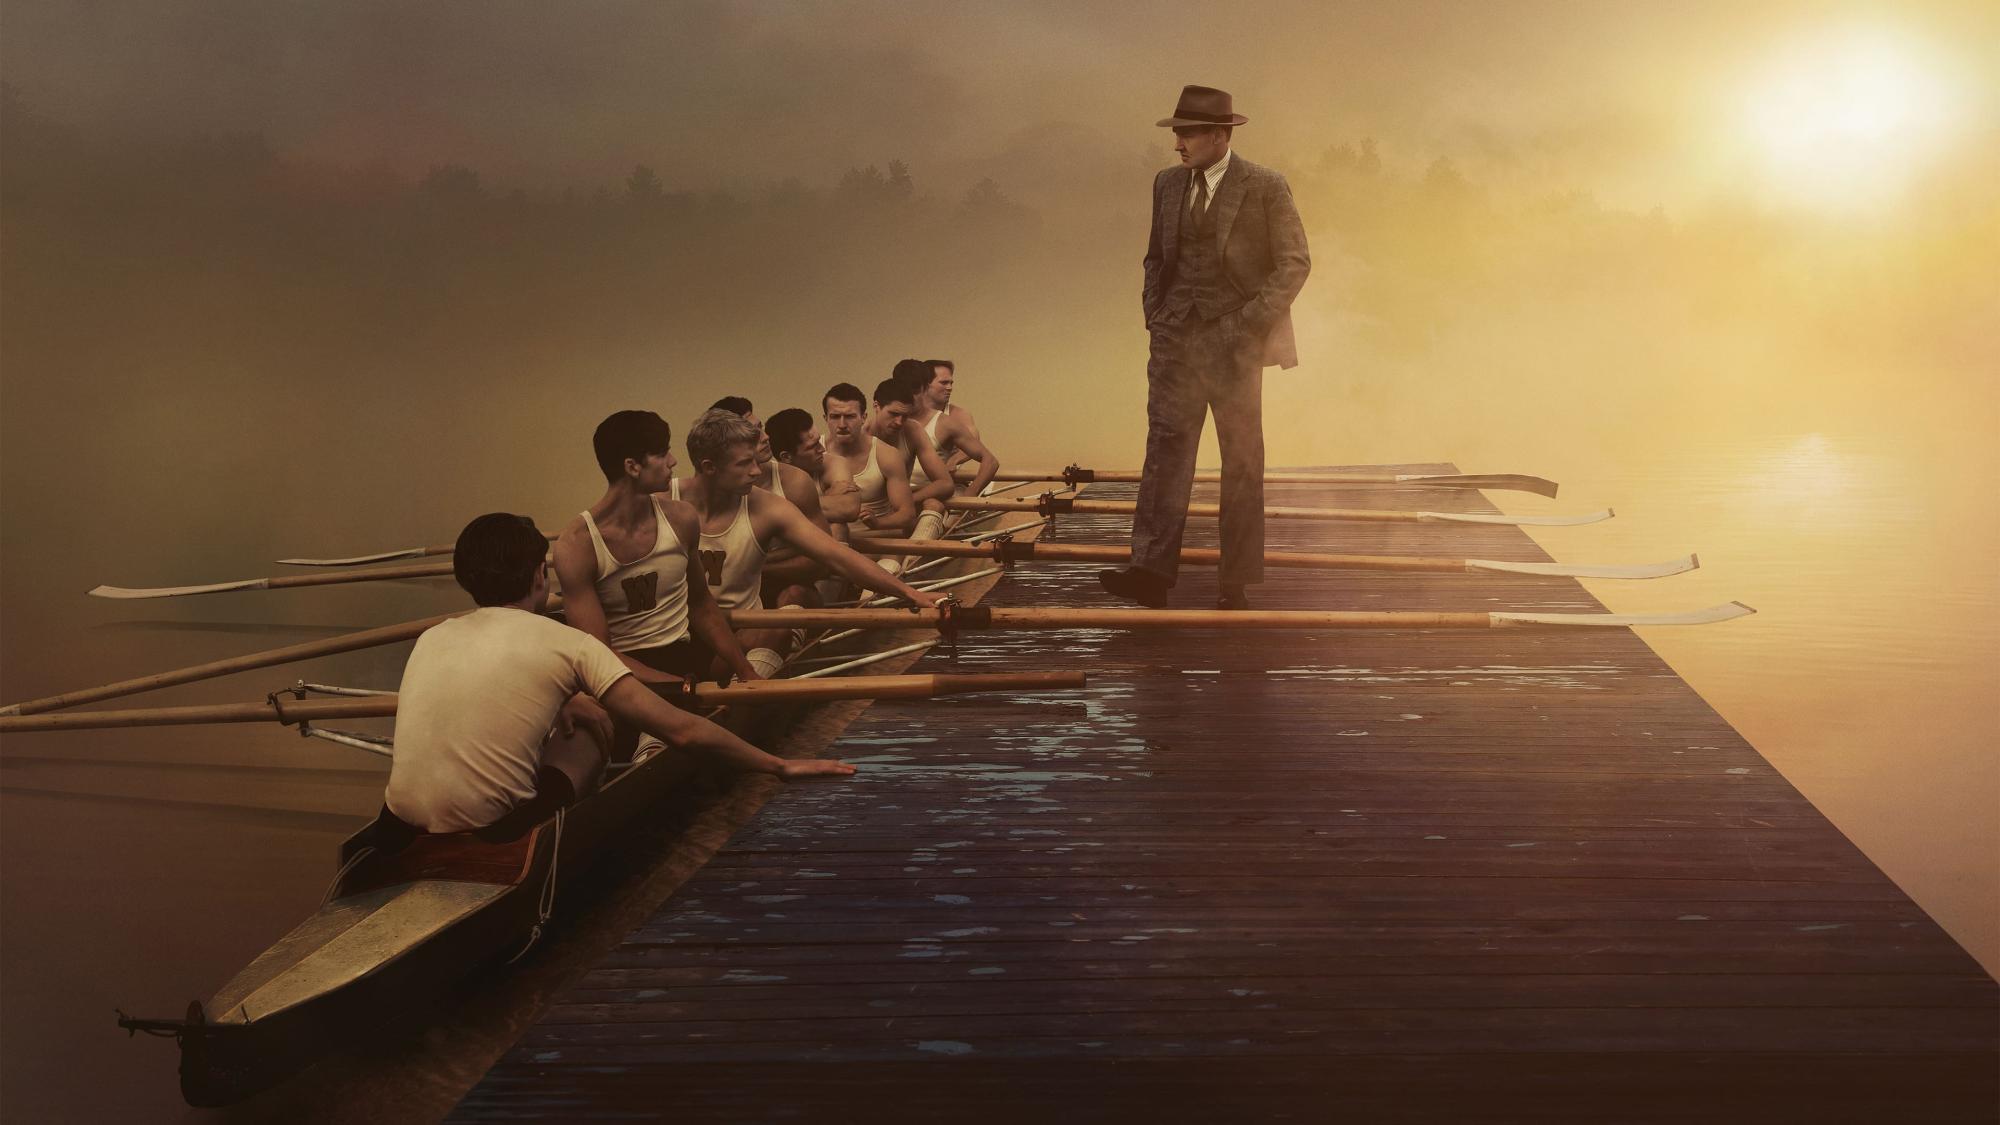 Backdrop Image for The Boys in the Boat